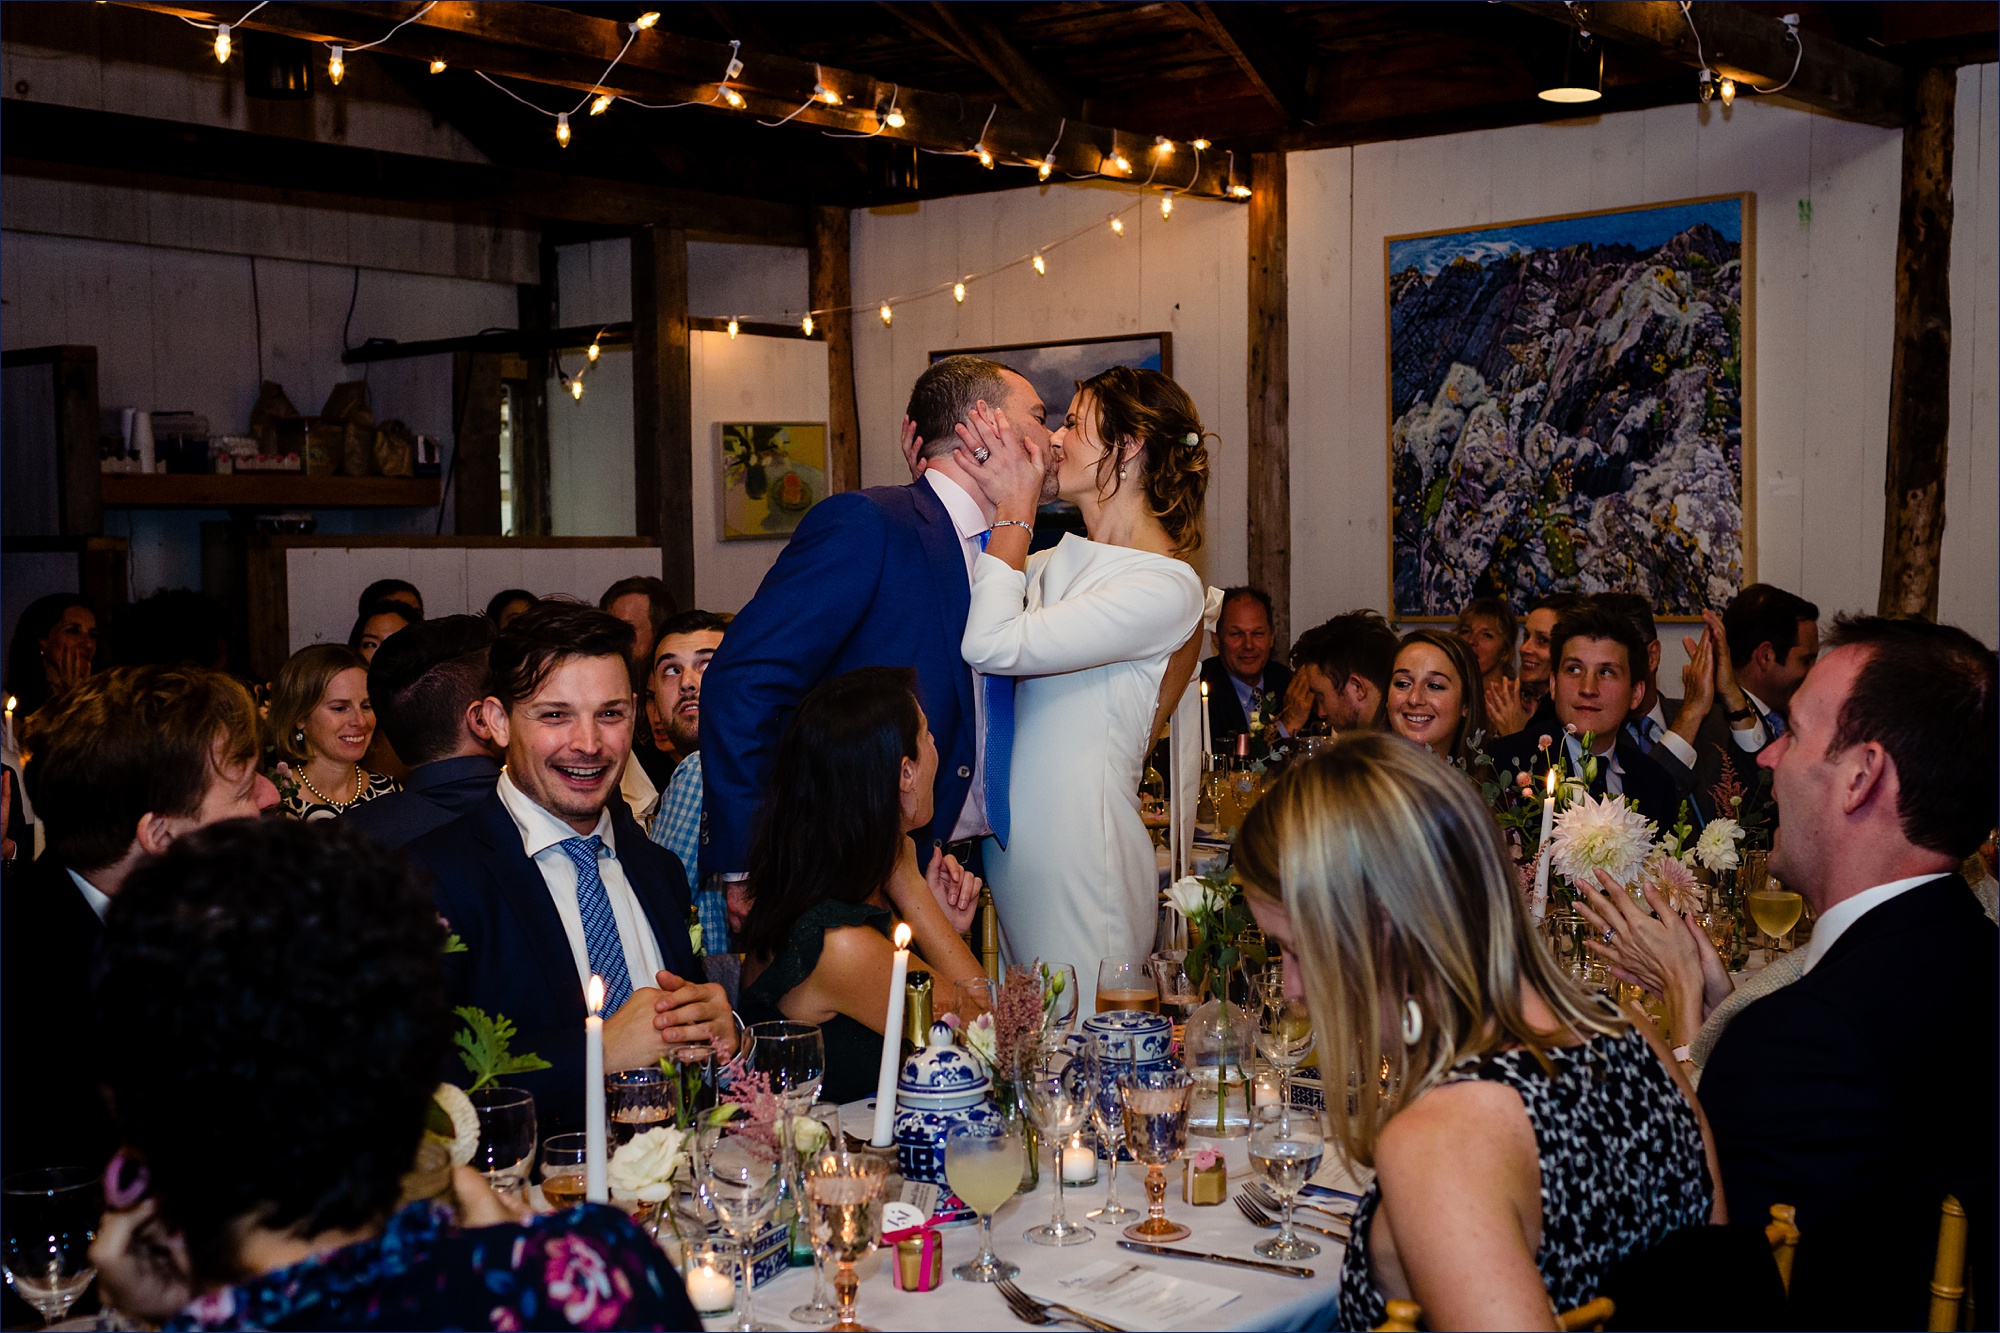 The bride and groom kiss at the dinner table at Islesford Dock Restaurant as the reception is about to start